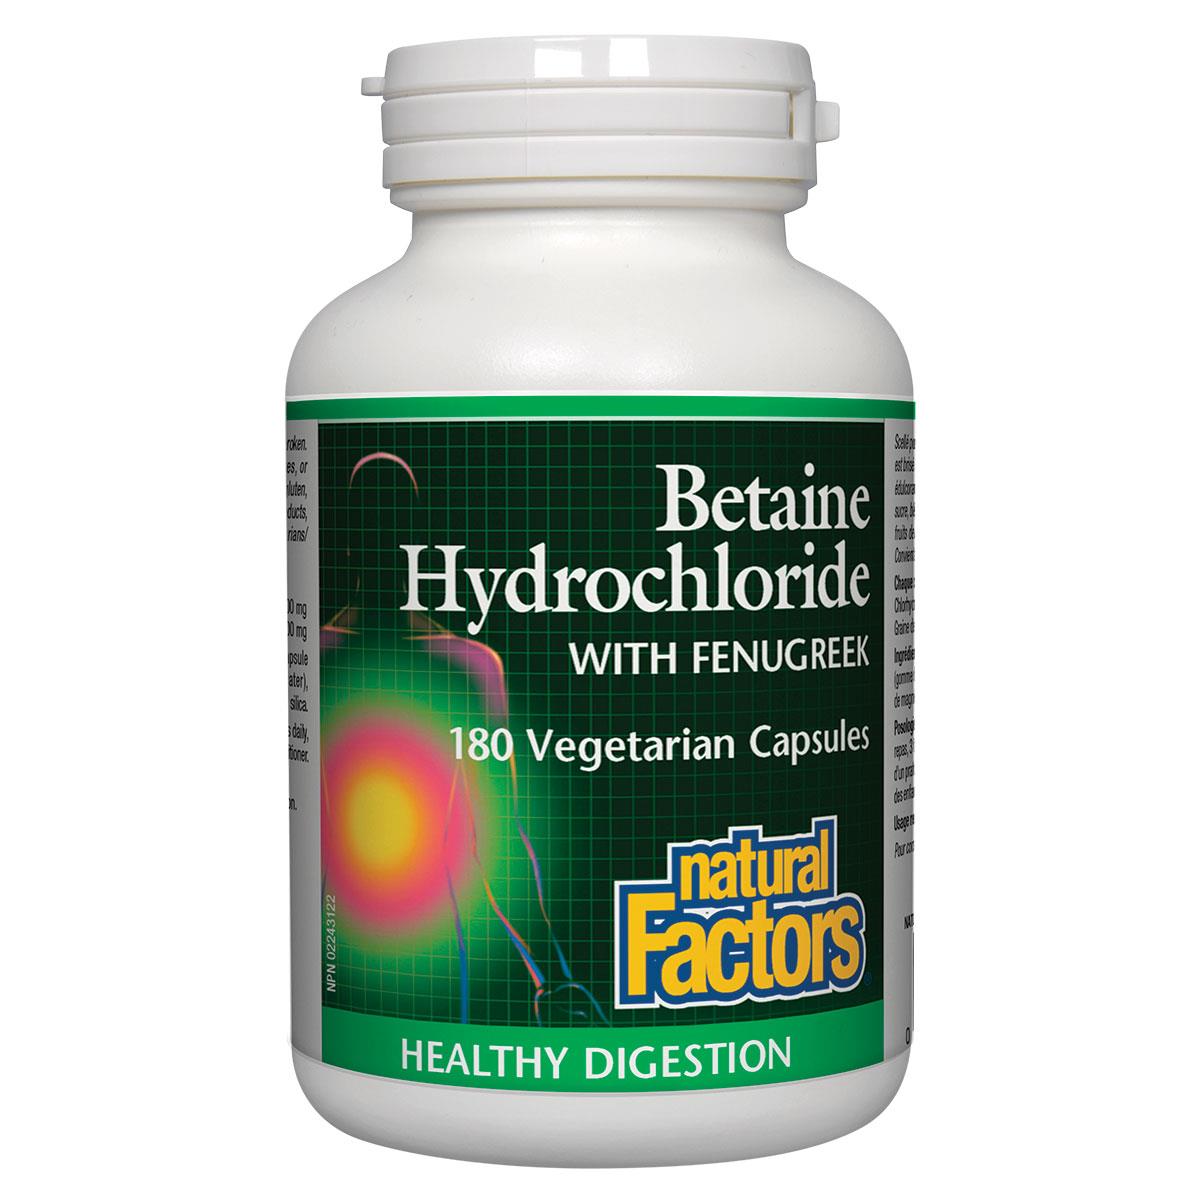 Natural Factors Betaine Hydrochloride with Fenugreek - 180 VCaps - Homegrown Foods, Stony Plain